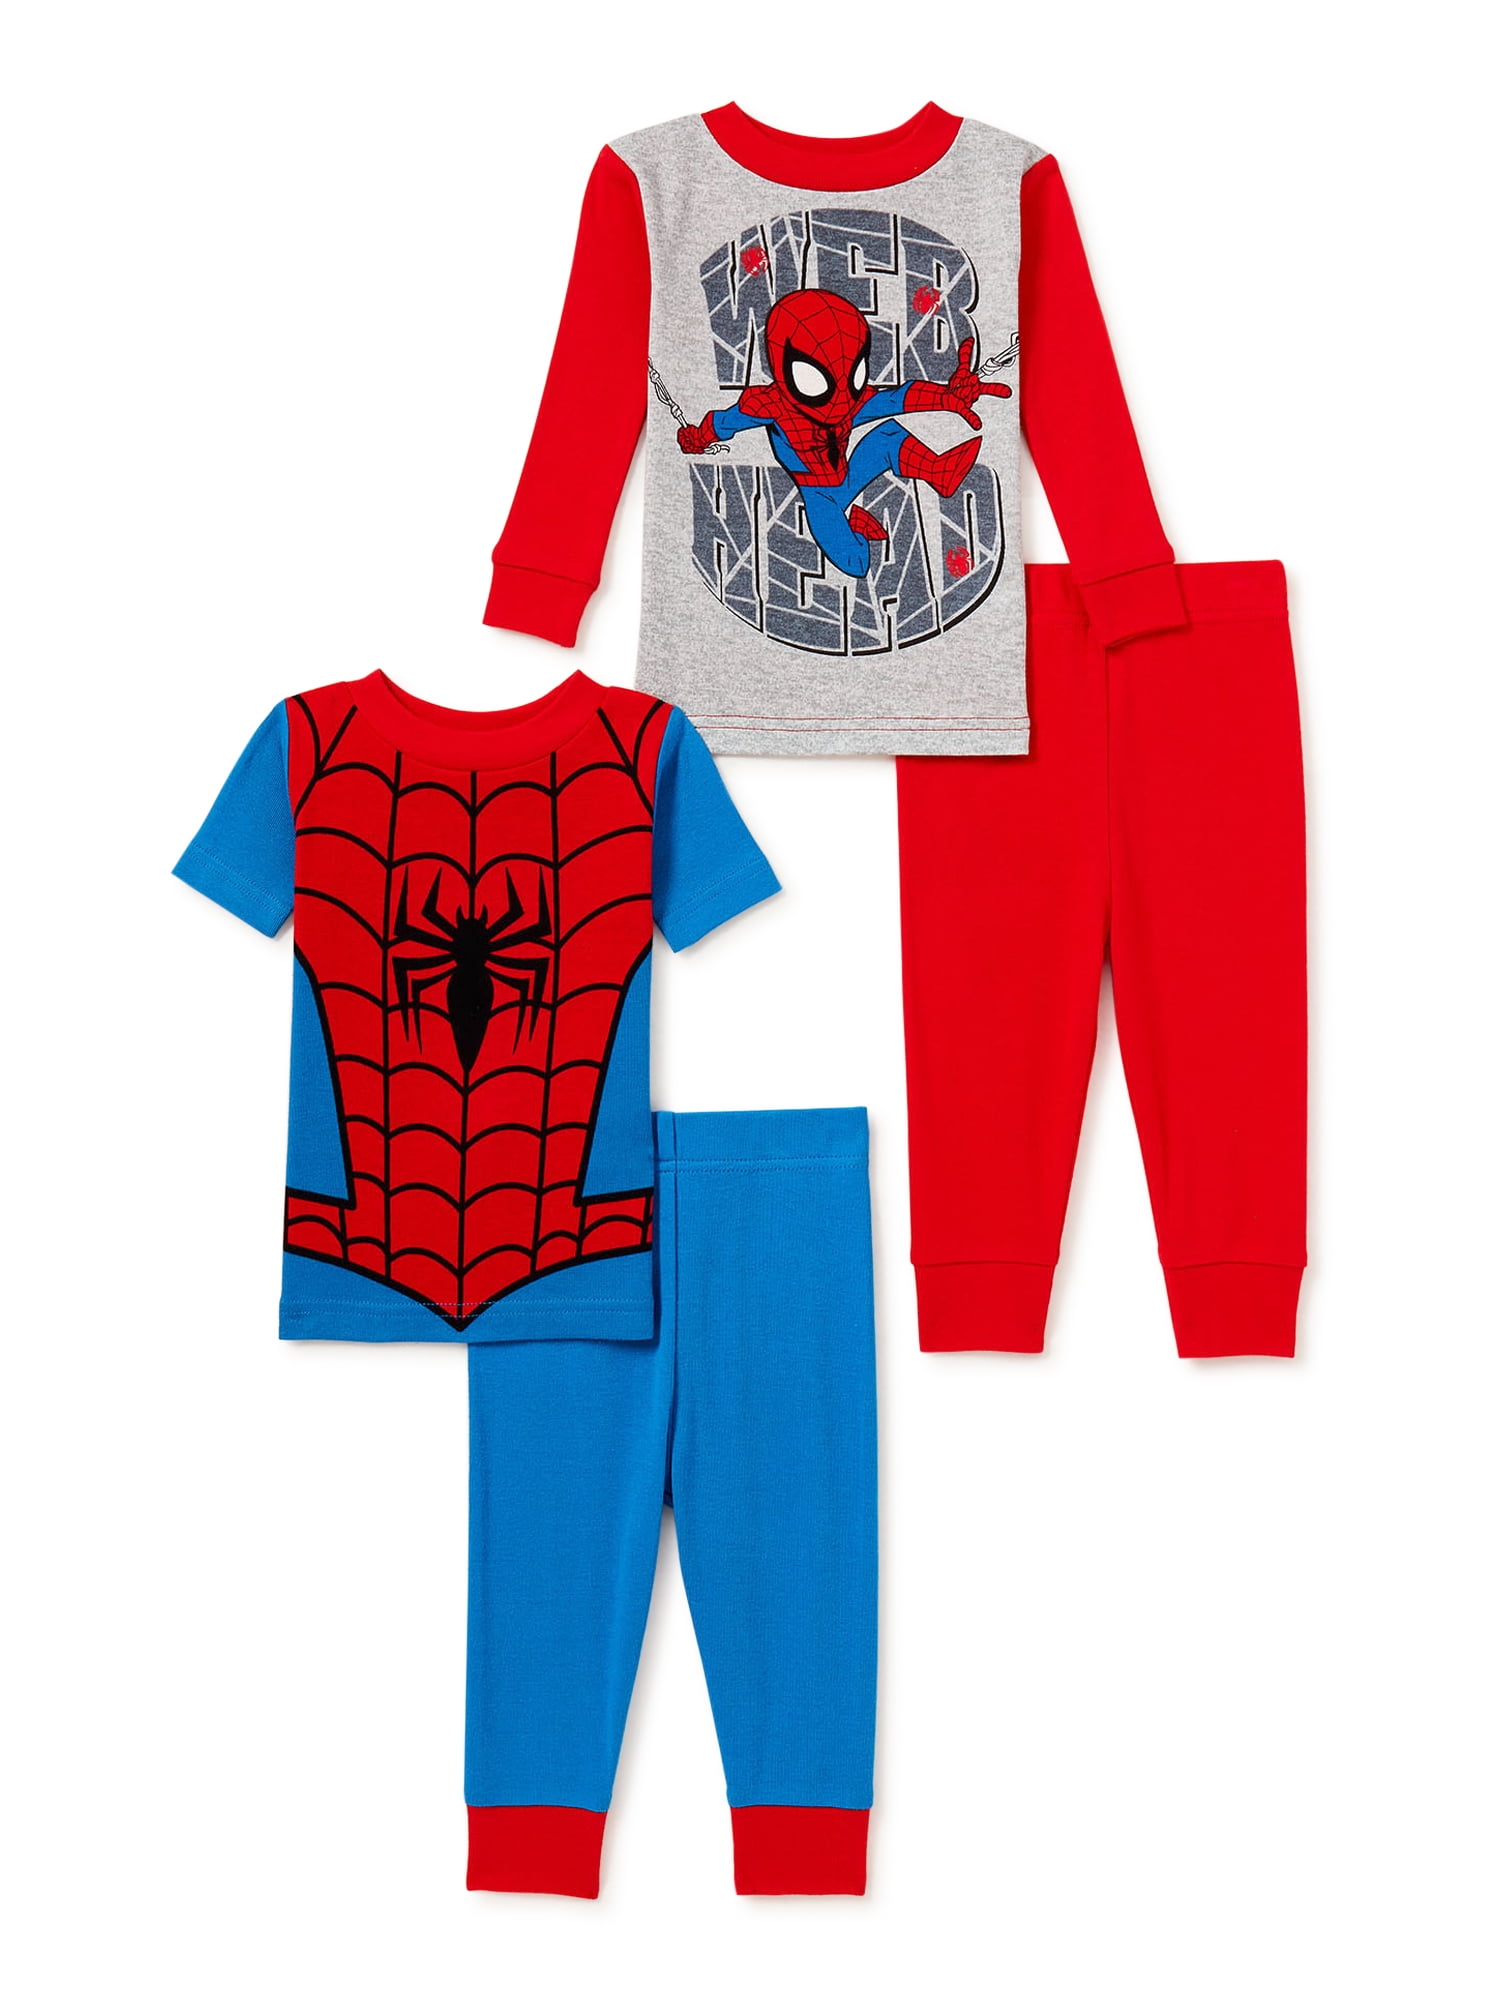 Spiderman Baby and Toddler Boy Pajamas, 4-Piece, Sizes 12M-5T